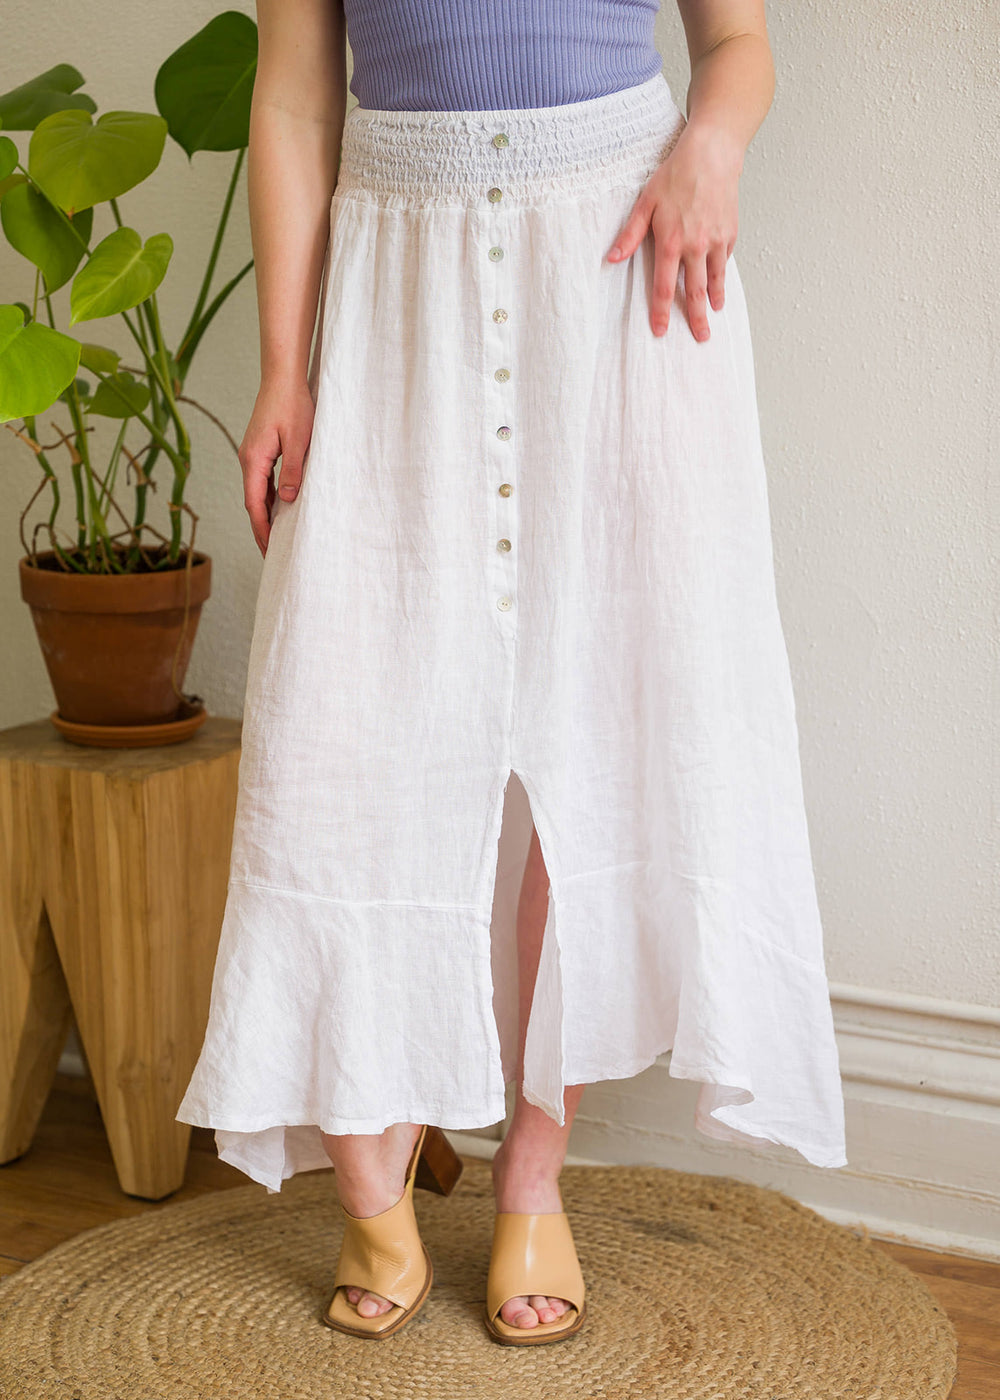 How to wear a white linen skirt.